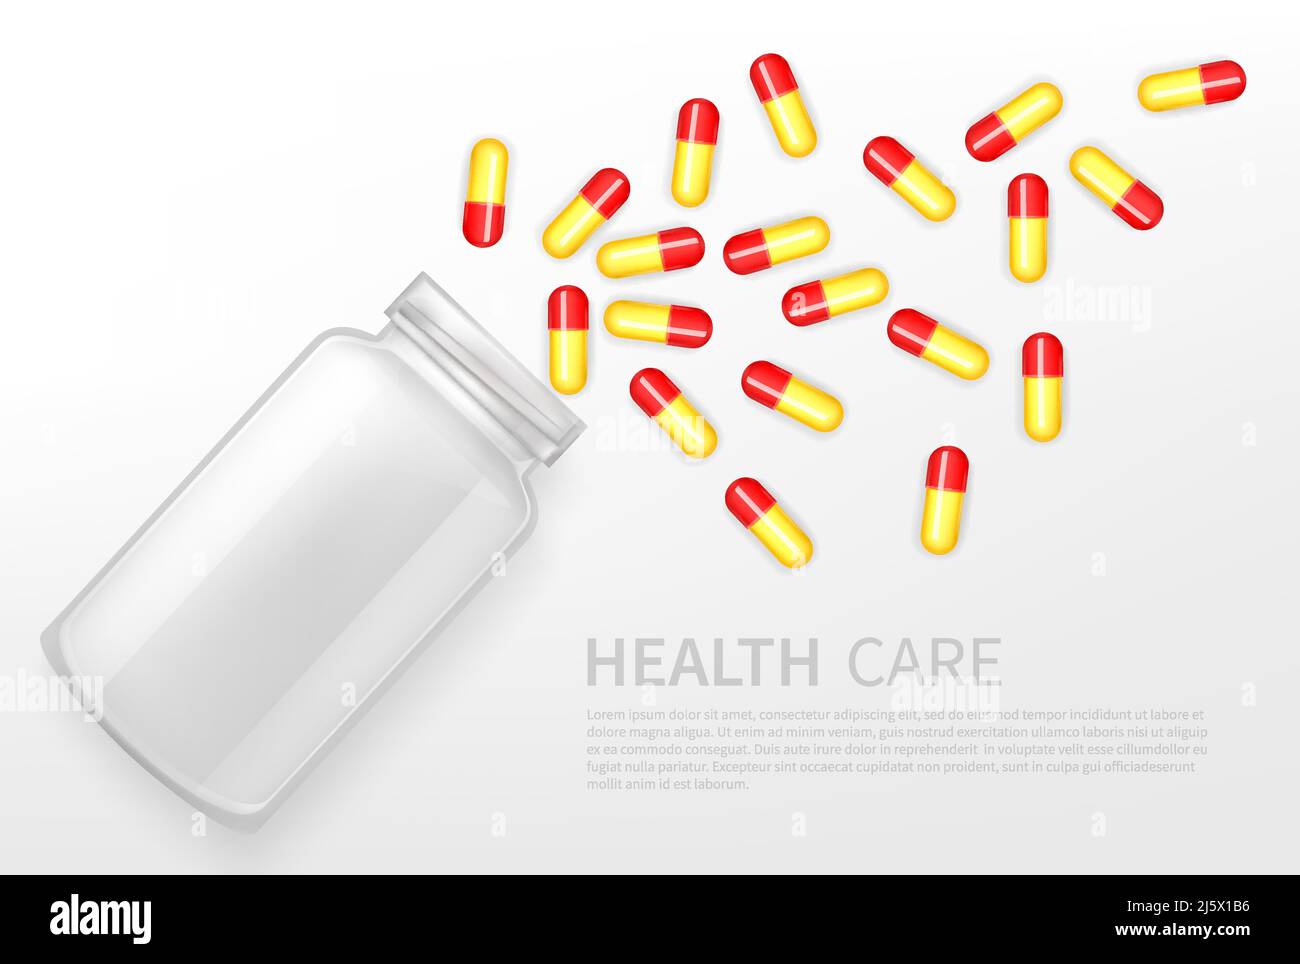 Health care service, pharmaceutical product, medical startup 3d realistic vector ad banner, poster template with pills, scattered medicines capsules, Stock Vector